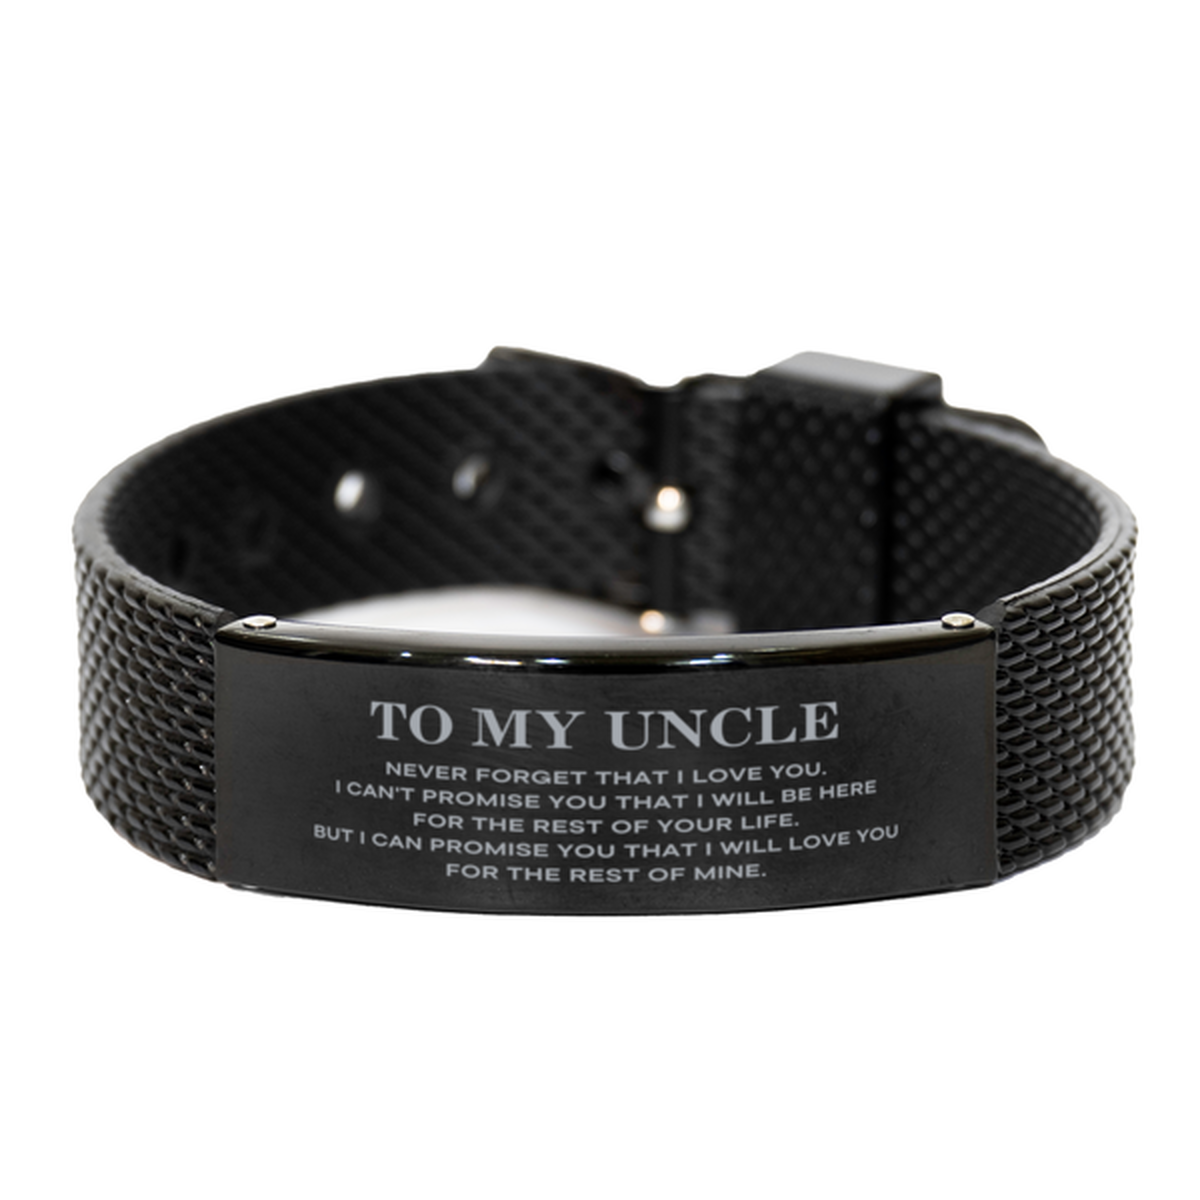 To My Uncle Gifts, I will love you for the rest of mine, Love Uncle Bracelet, Birthday Christmas Unique Black Shark Mesh Bracelet For Uncle